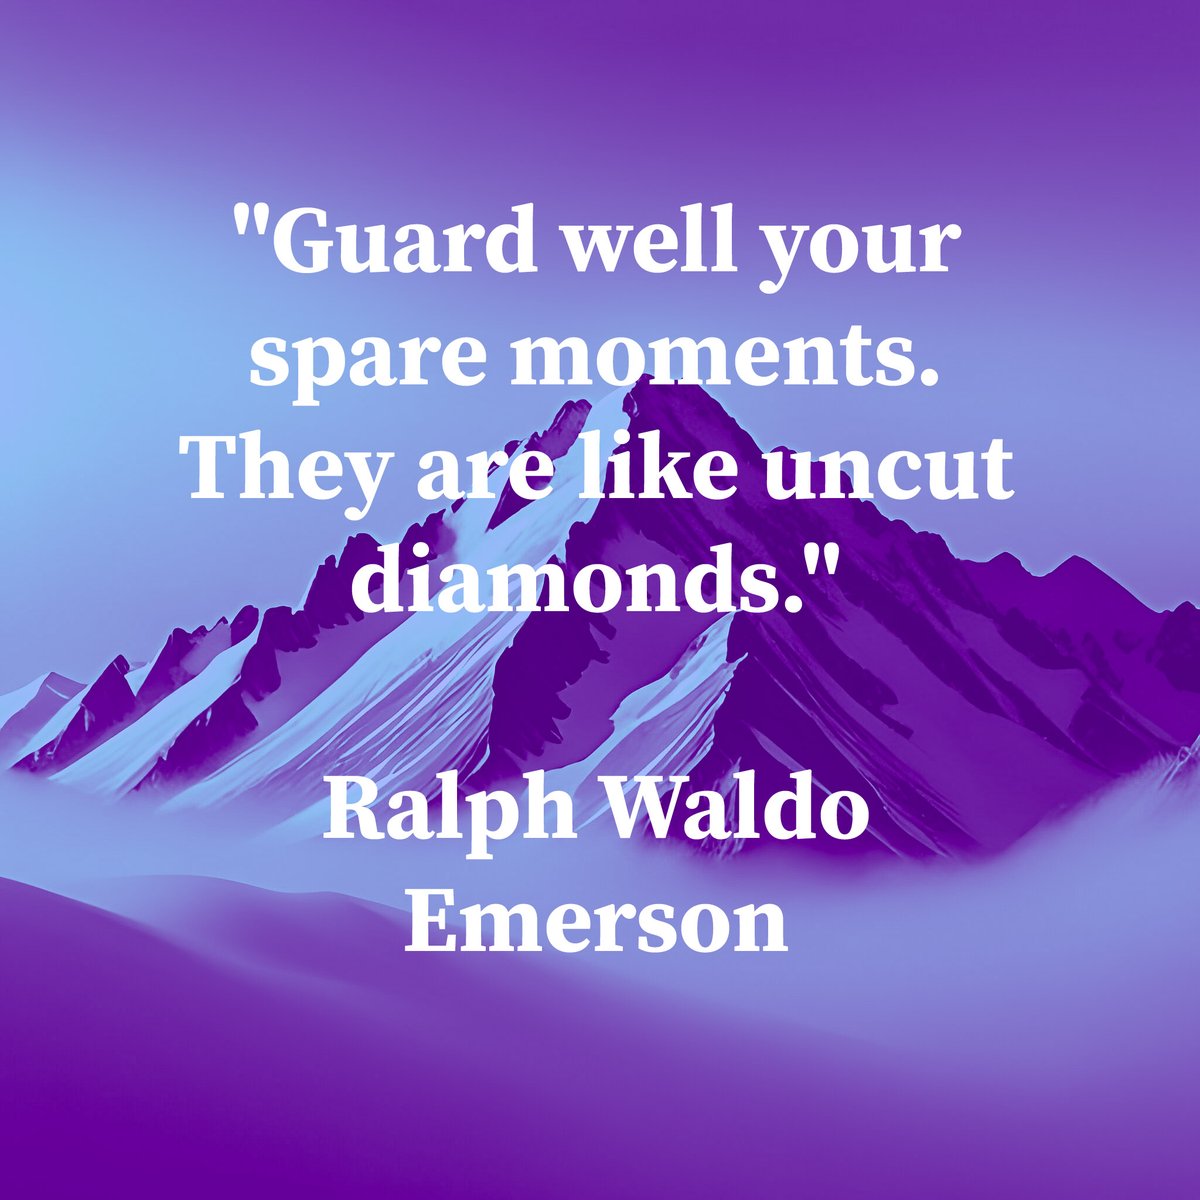 Emerson reminds us: 'Guard well your spare moments. They are like uncut diamonds.' In our fast-paced world, let's cherish these brief periods. They're not just gaps in our day, but opportunities for growth, peace, and creativity. #TimeIsPrecious #MindfulMoments #EmersonWisdom